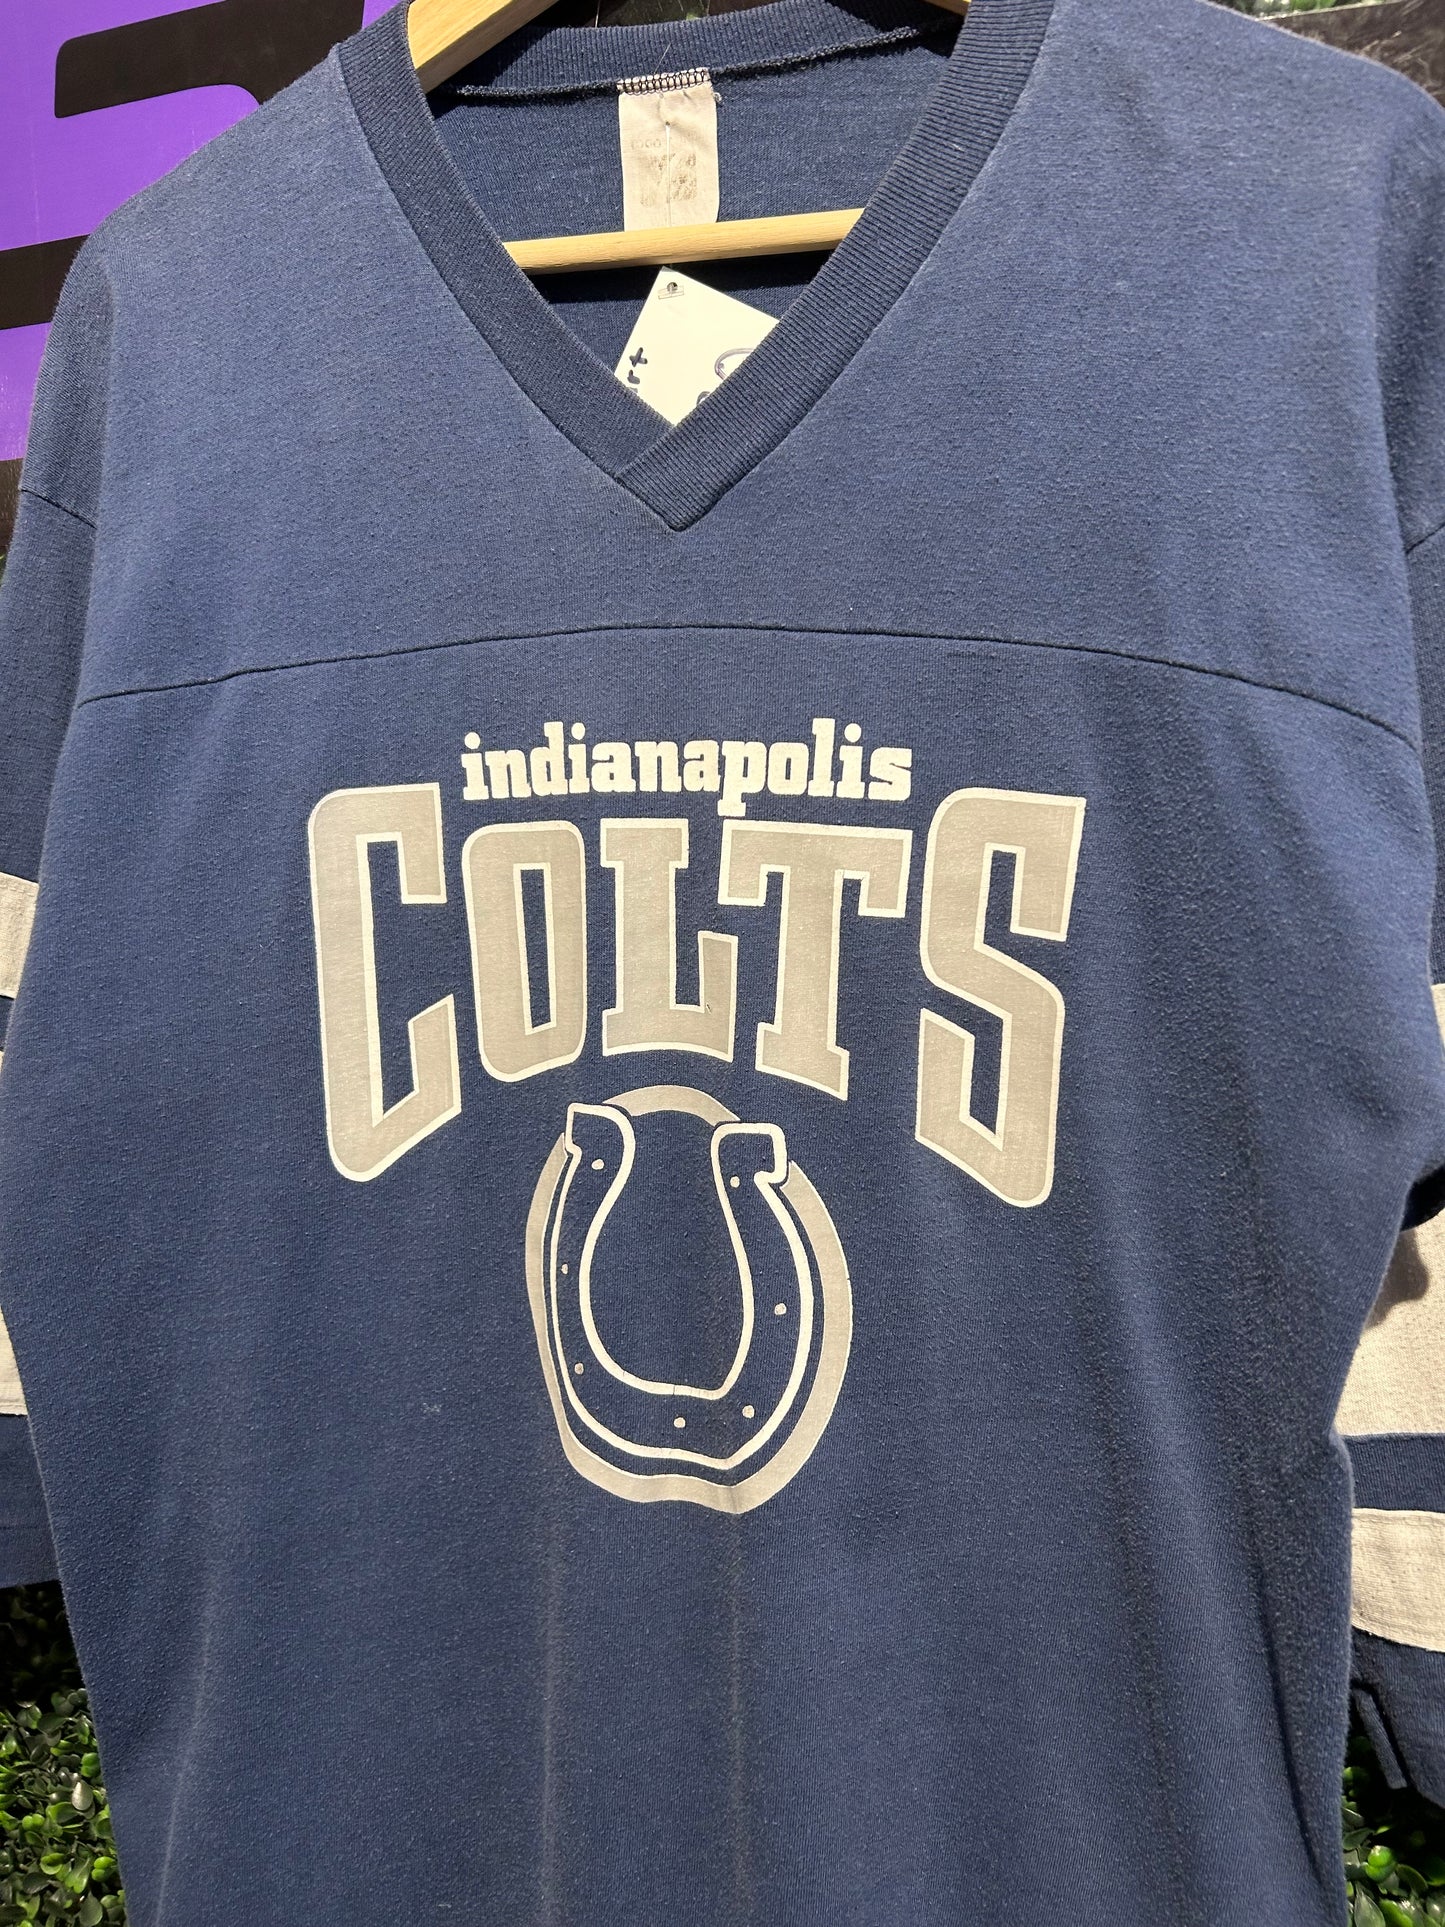 90s Indianapolis Colts 3/4 Sleeve Shirt Jersey. Size L/XL